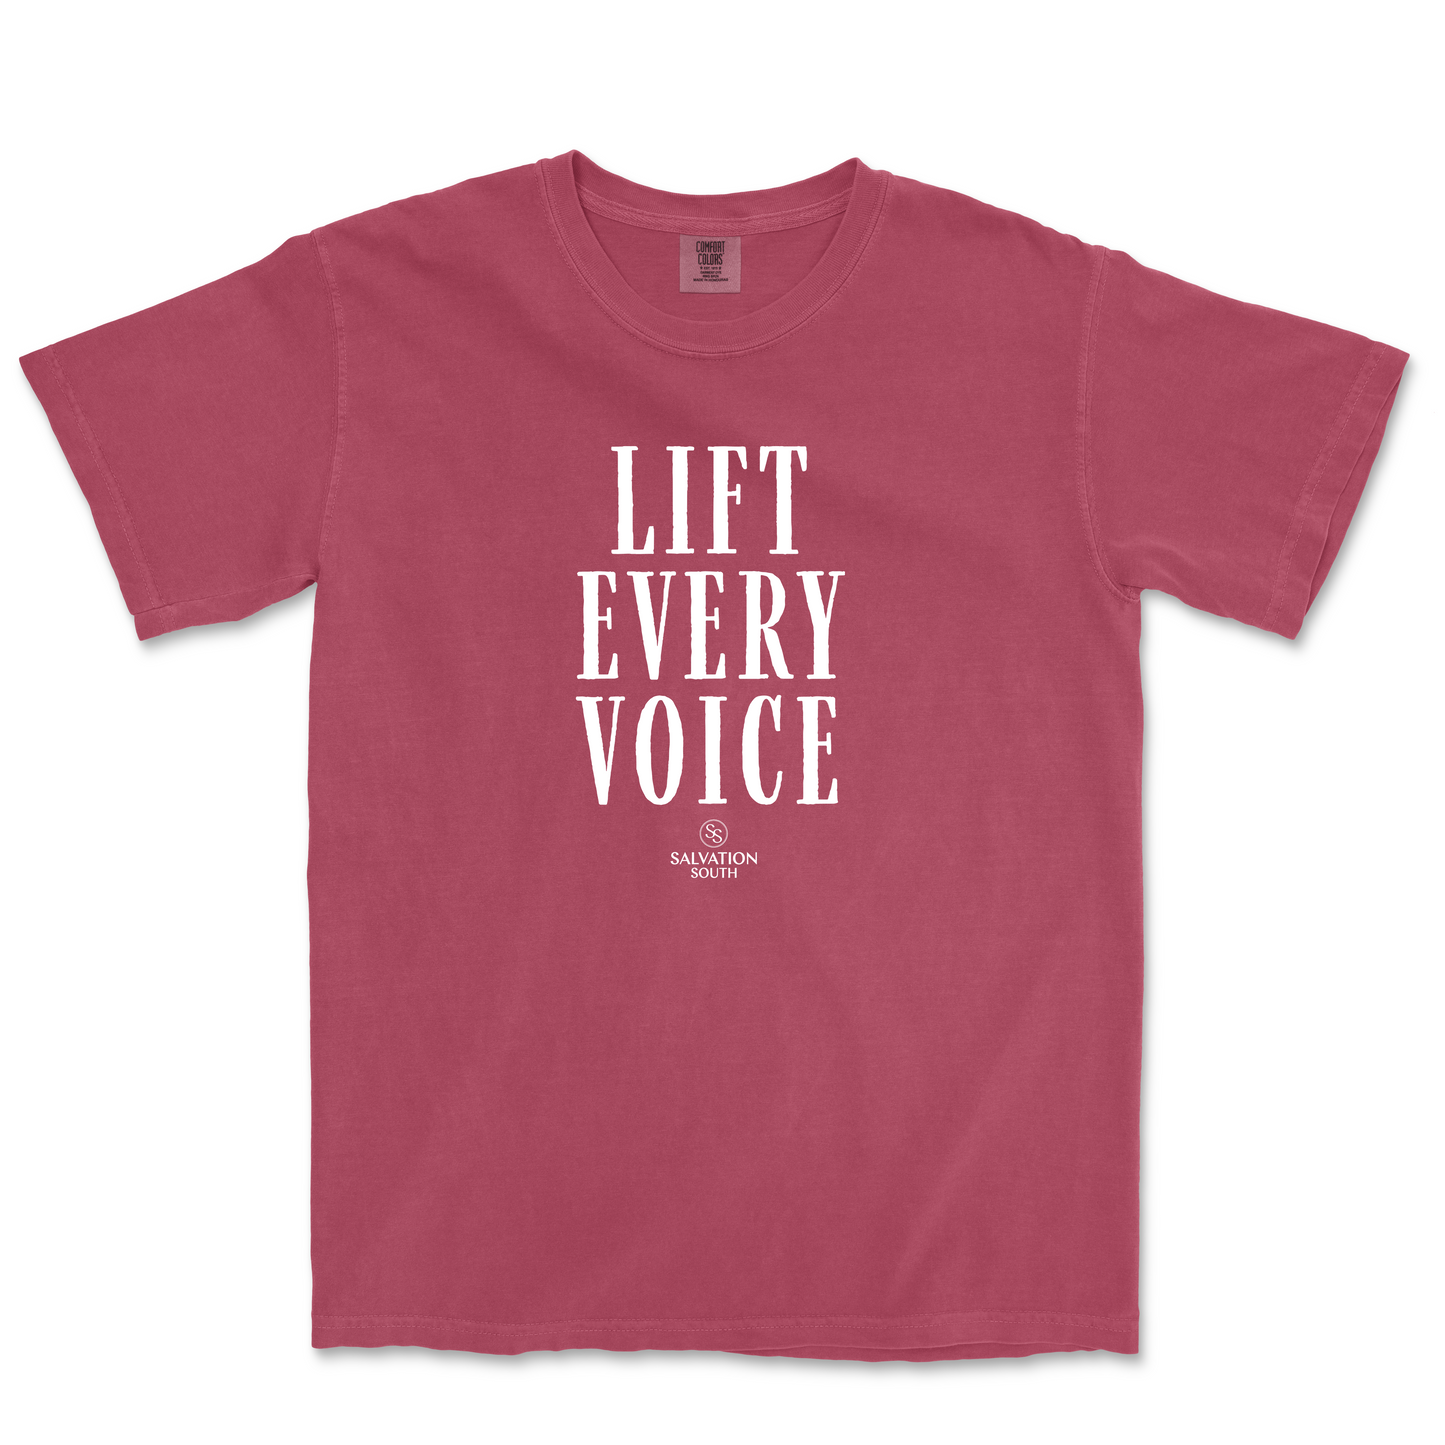 The Lift Every Voice T-shirt